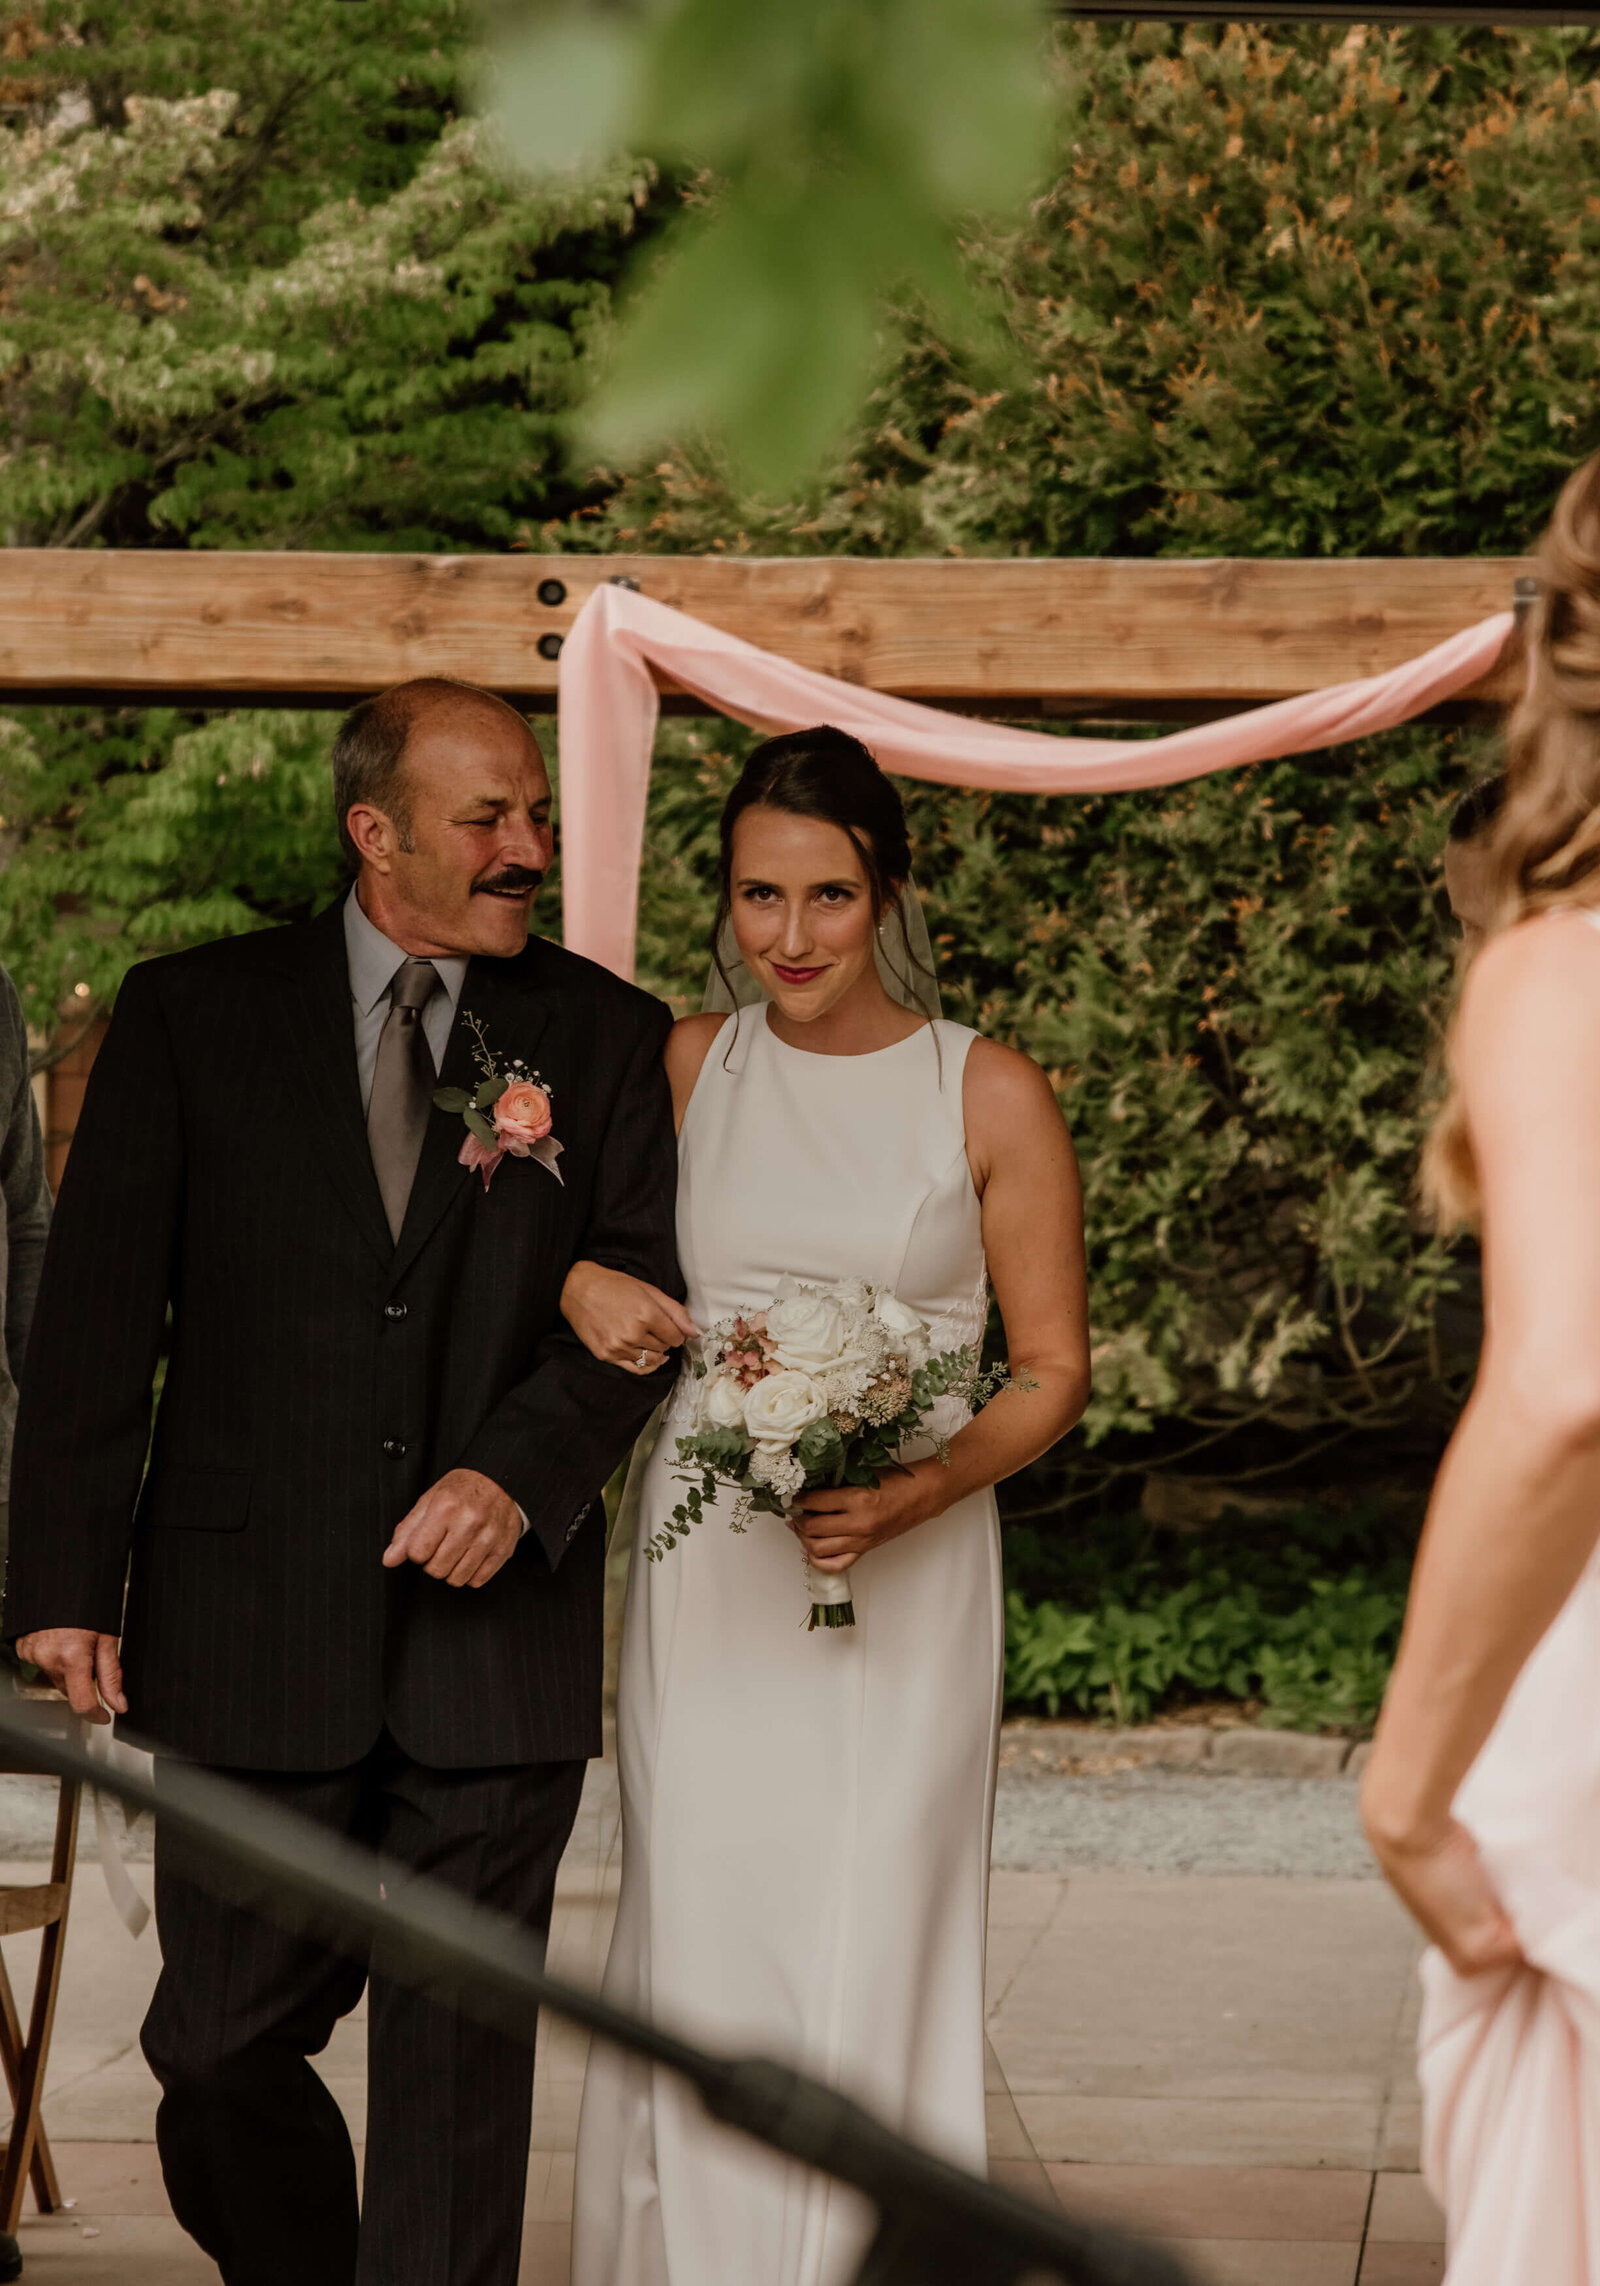 Bride's father walks her down the aisle.